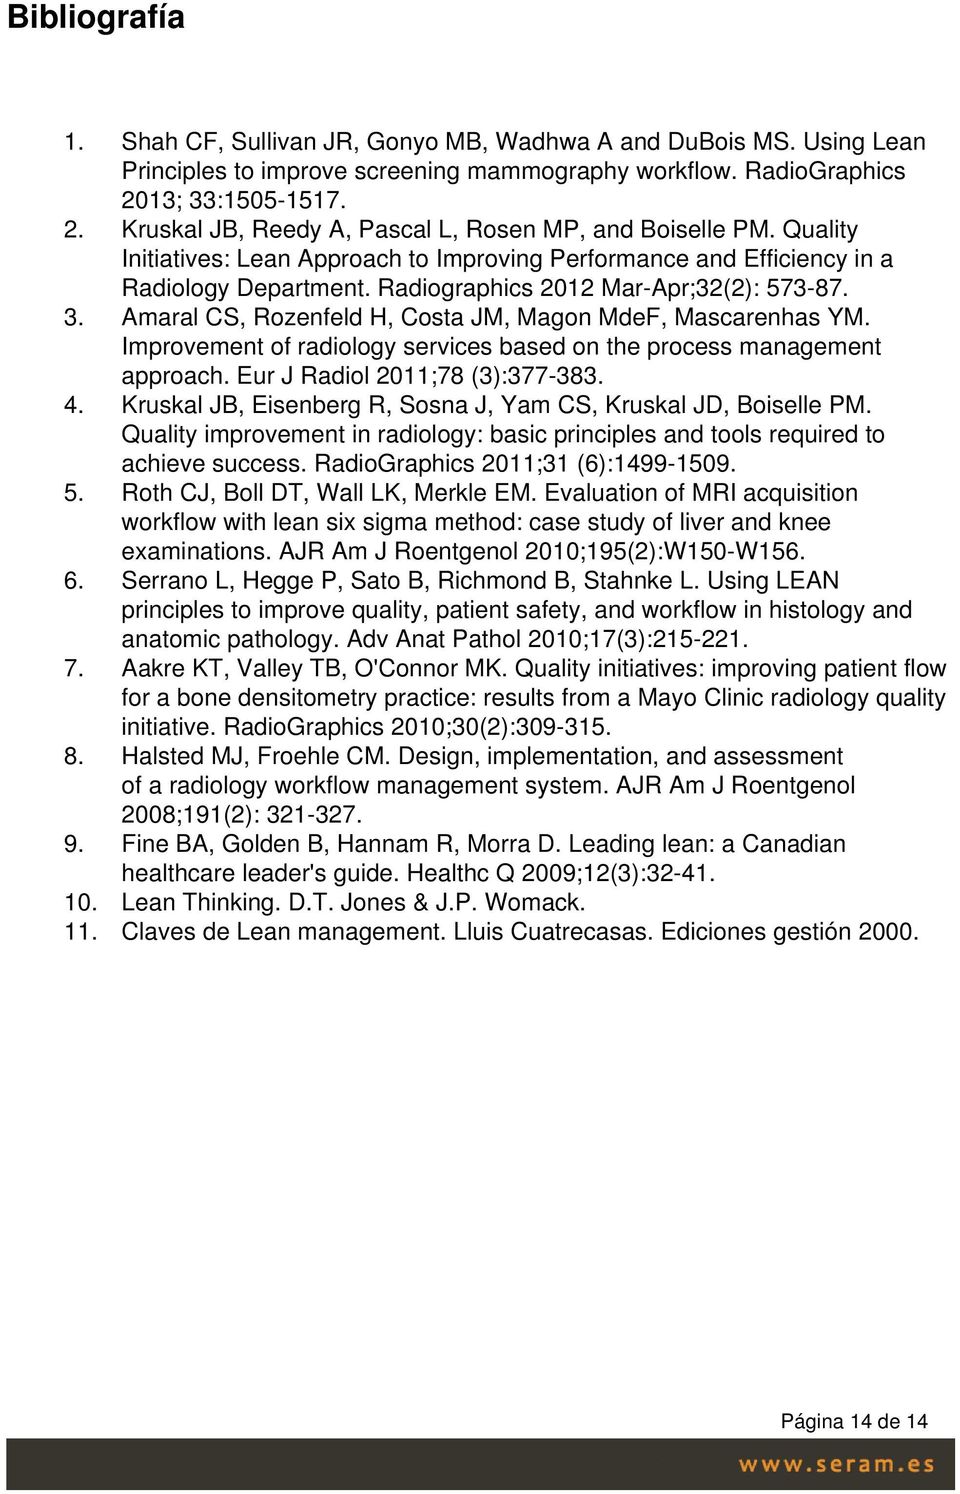 Radiographics 2012 Mar-Apr;32(2): 573-87. 3. Amaral CS, Rozenfeld H, Costa JM, Magon MdeF, Mascarenhas YM. Improvement of radiology services based on the process management approach.